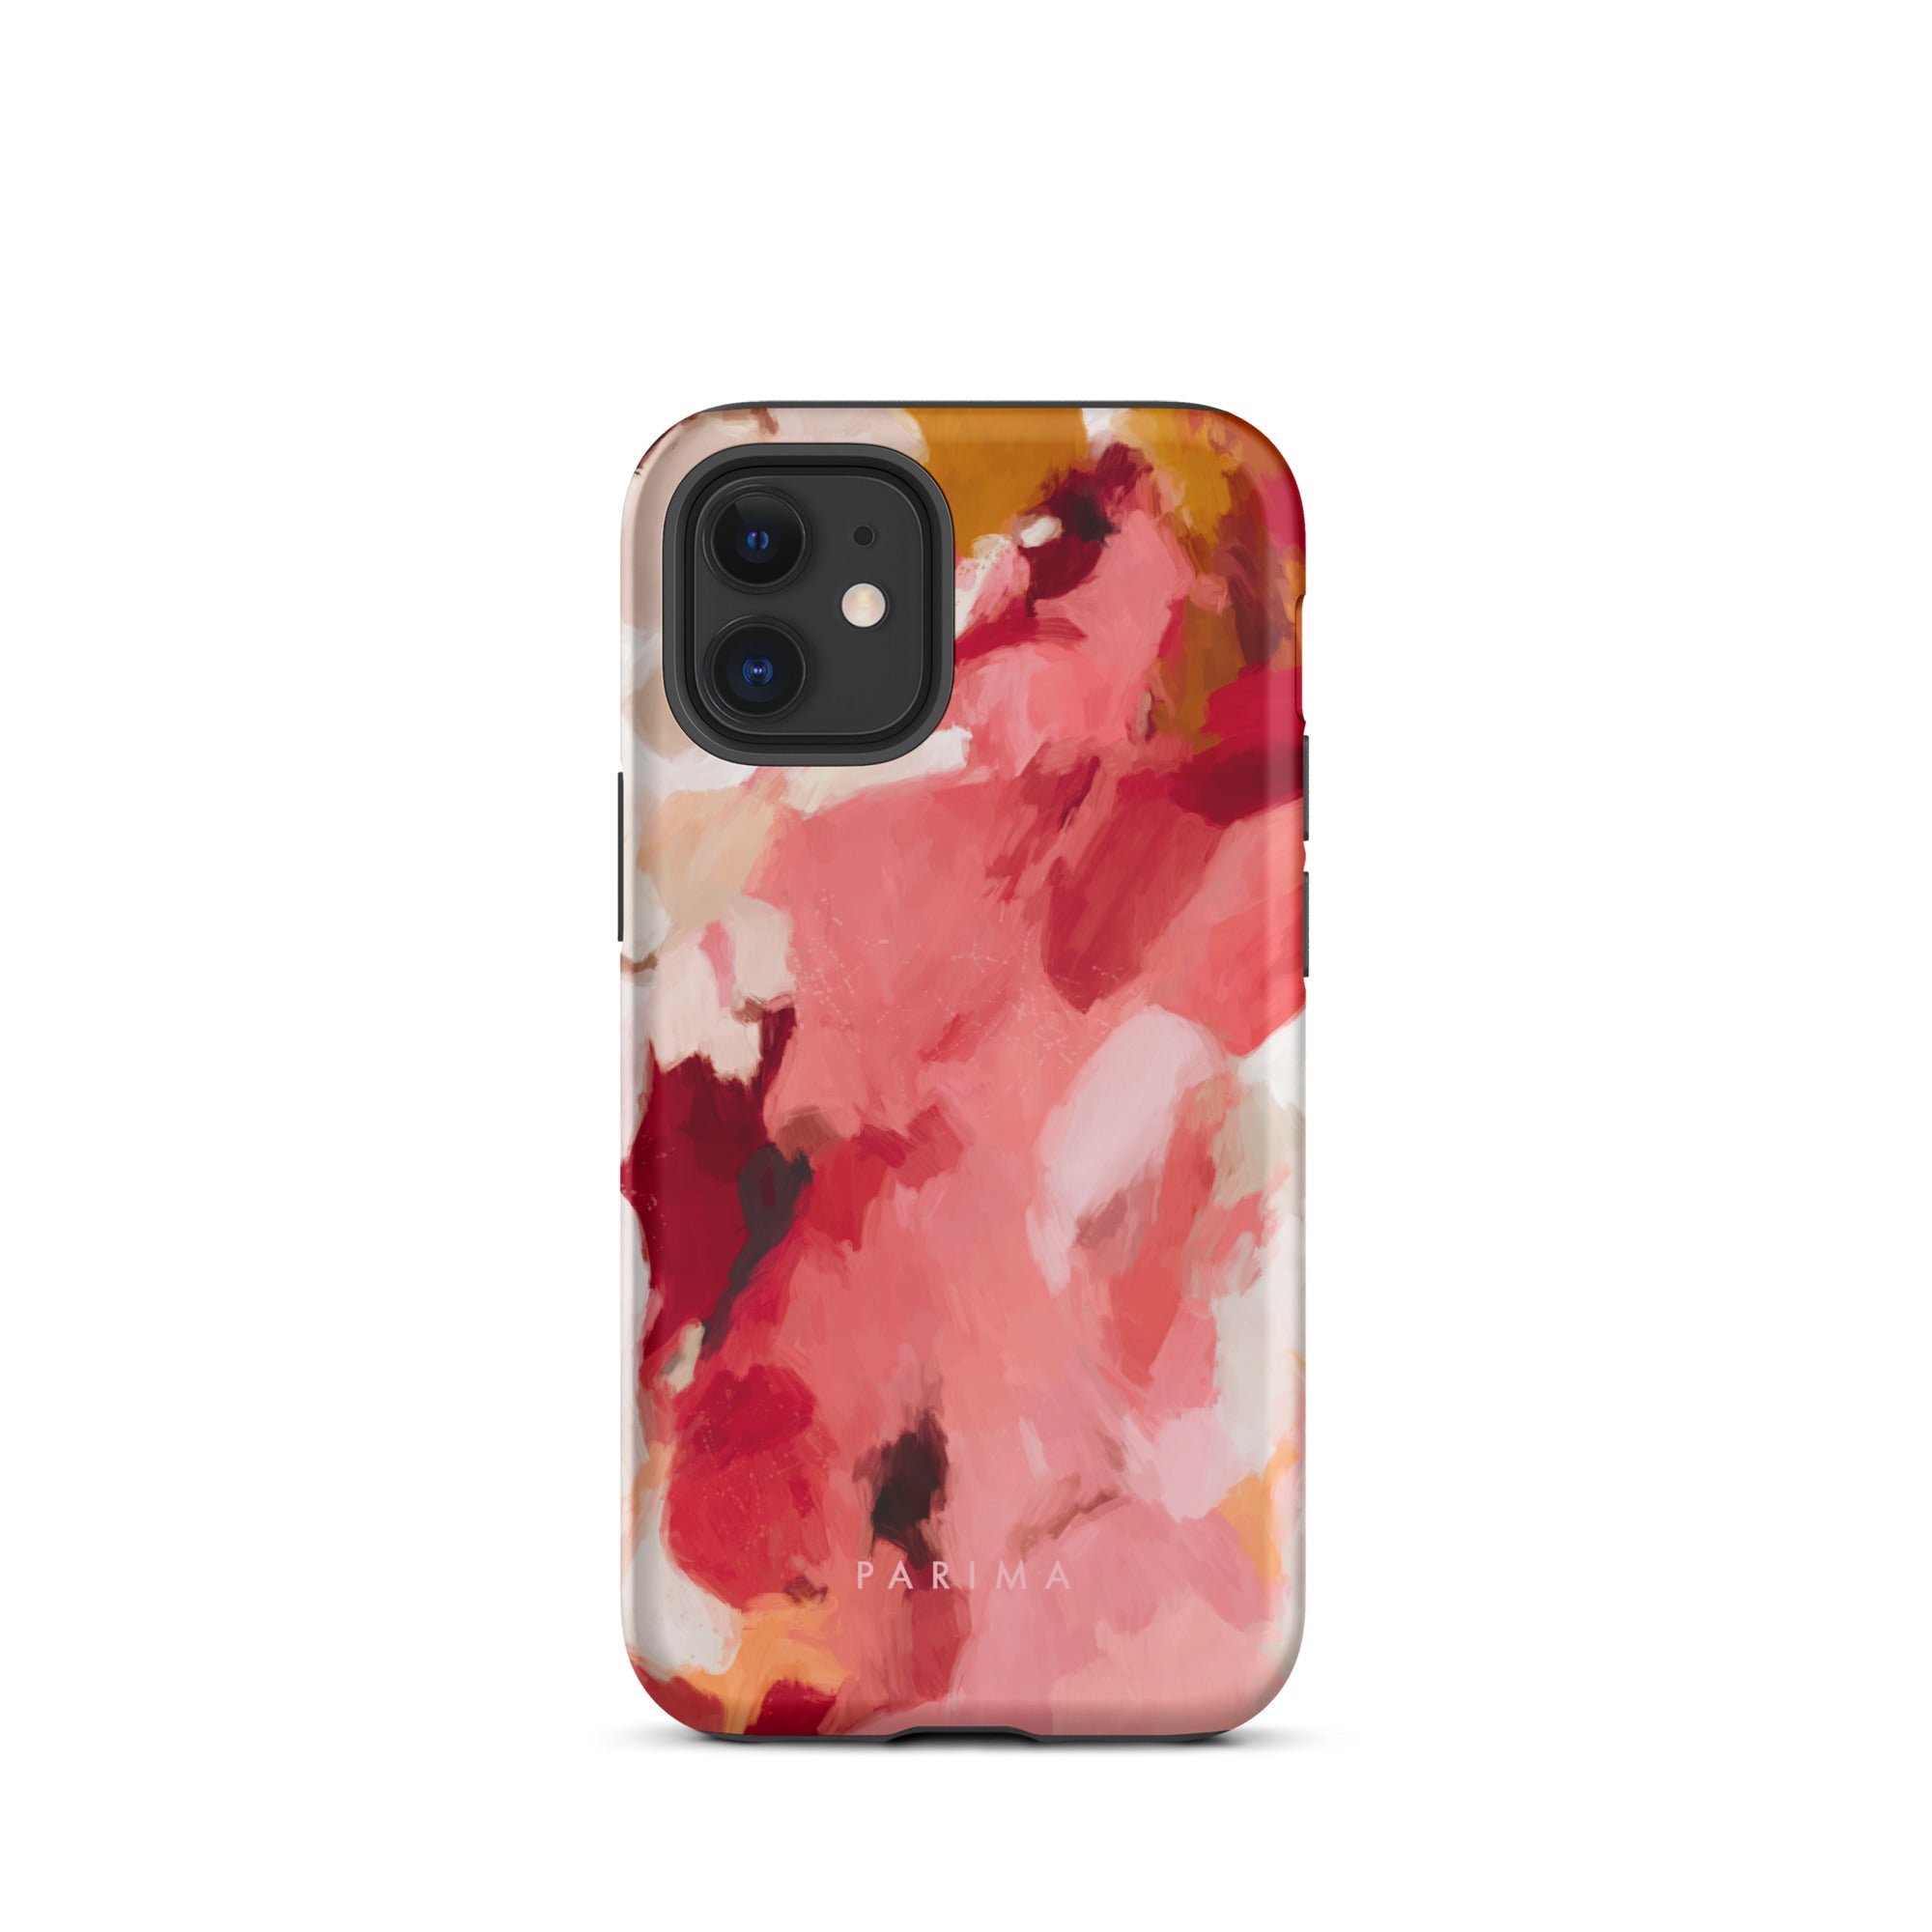 Apple, red and pink abstract art - iPhone 12 Mini tough case by Parima Studio